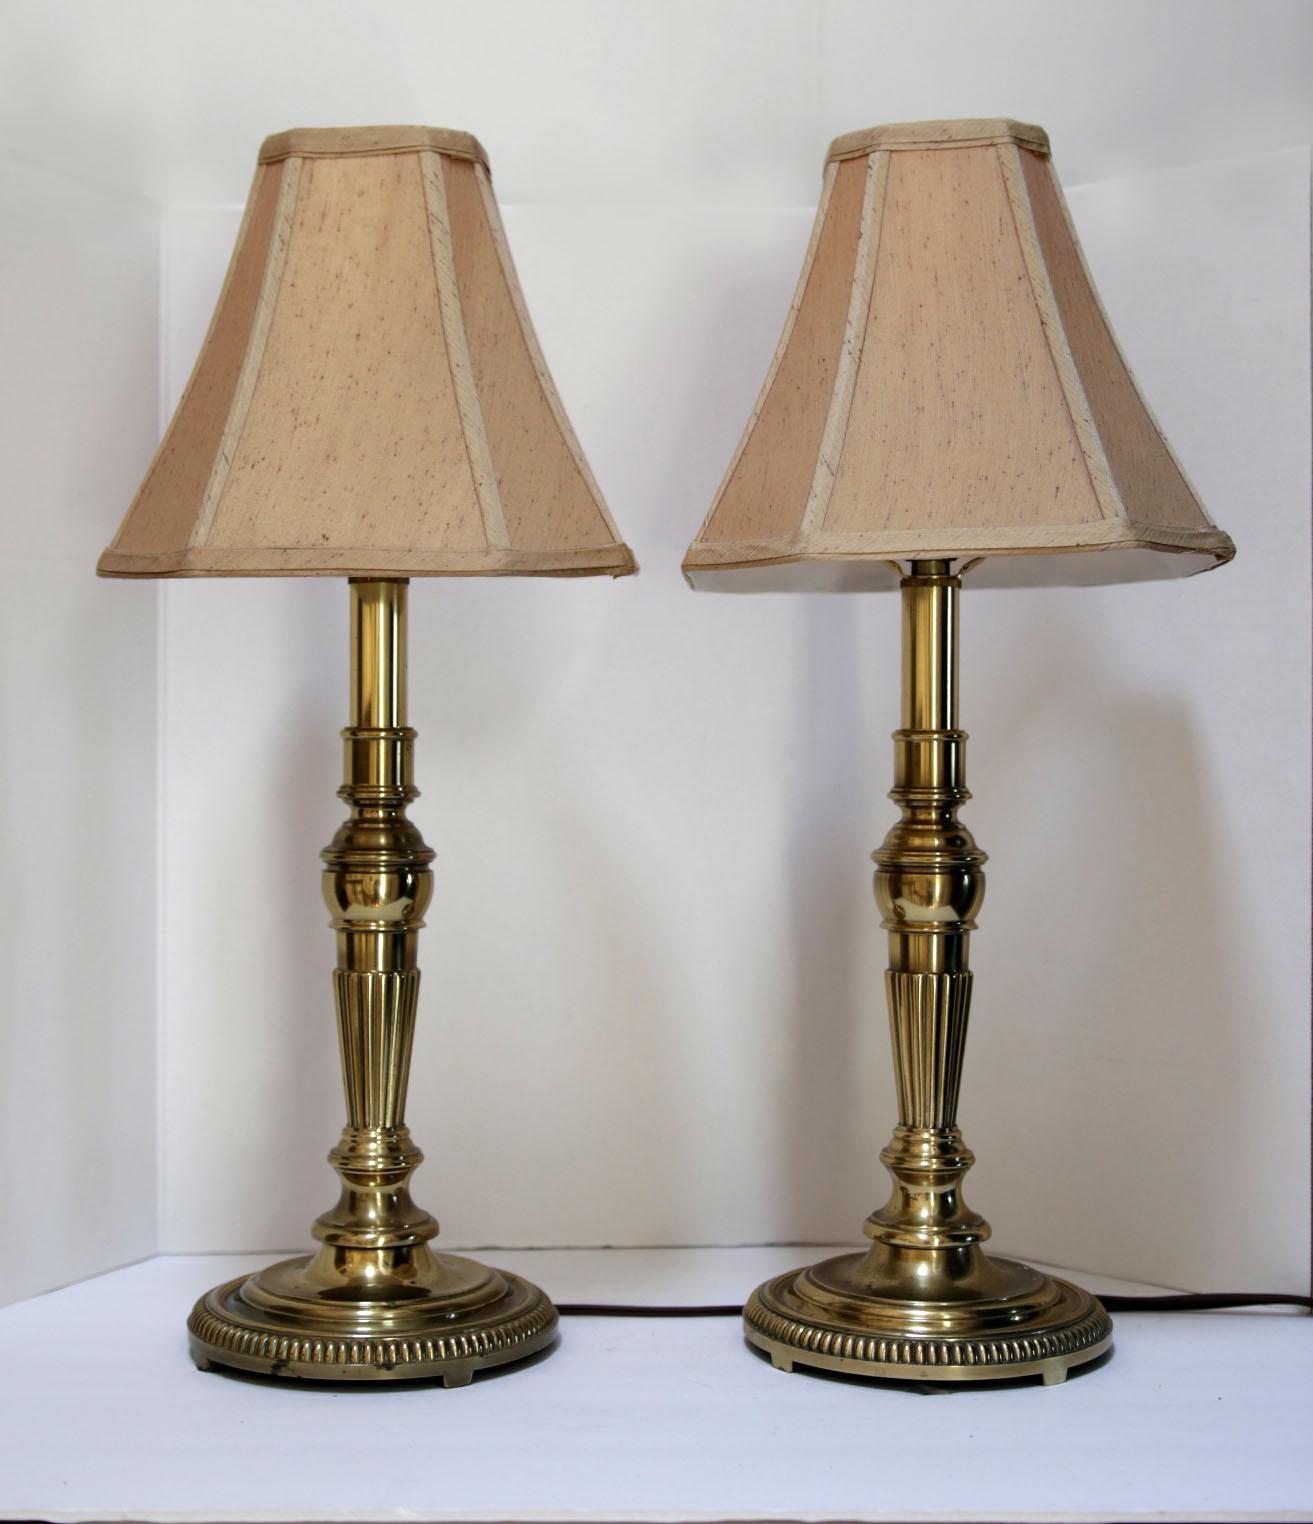 American Classical Stiffel Buffet or Console Brass Vintage Pair of Table Lamps with Shades